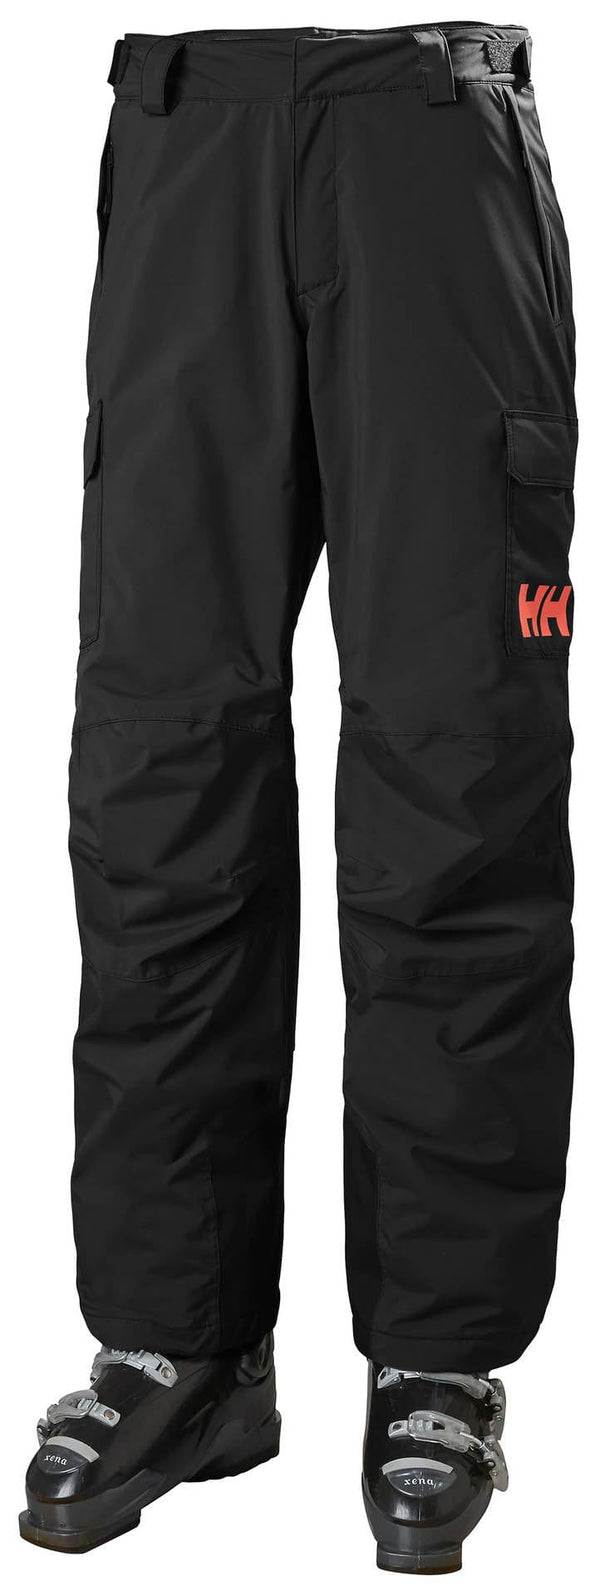 Helly Hansen CLOTHING - Women - Outerwear - Pant Helly Hansen *23W* W Switch Cargo Insulated Pant